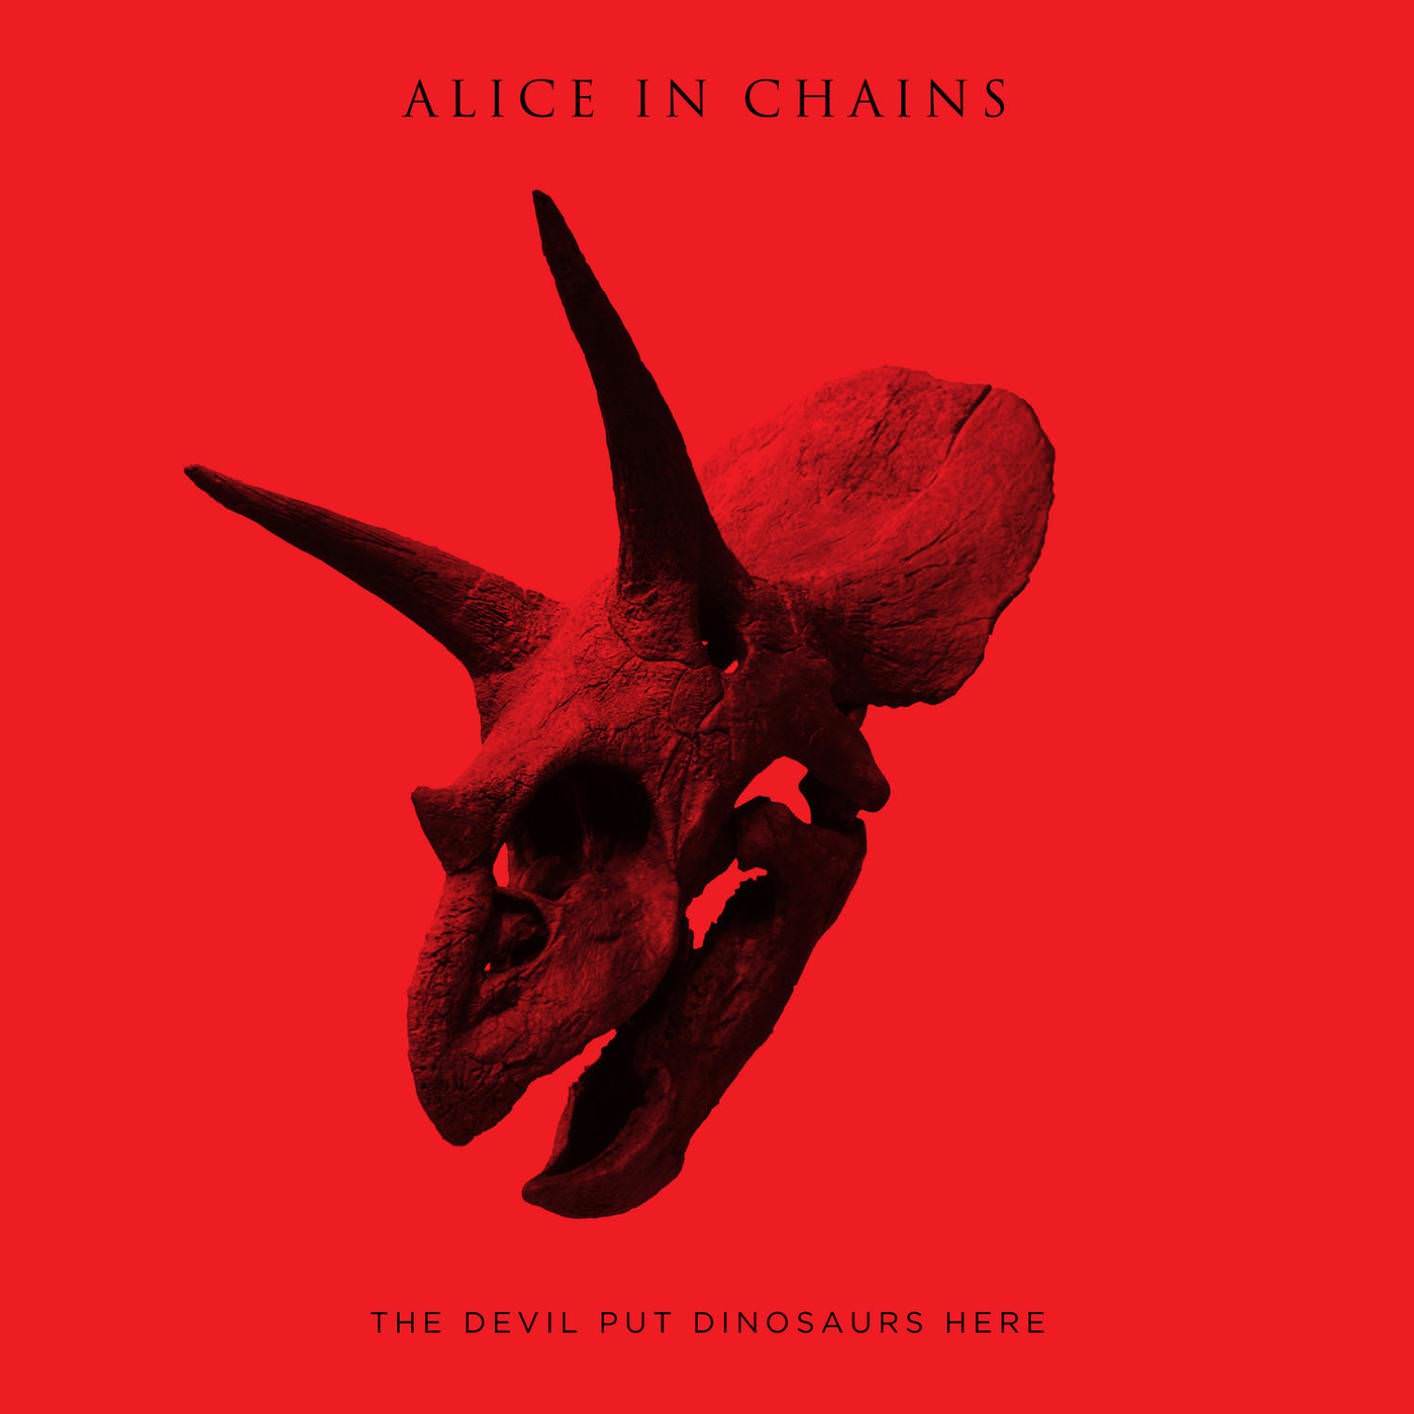 Alice in Chains - The Devil Put Dinosaurs Here (2013/2018) [FLAC 24bit/96kHz]